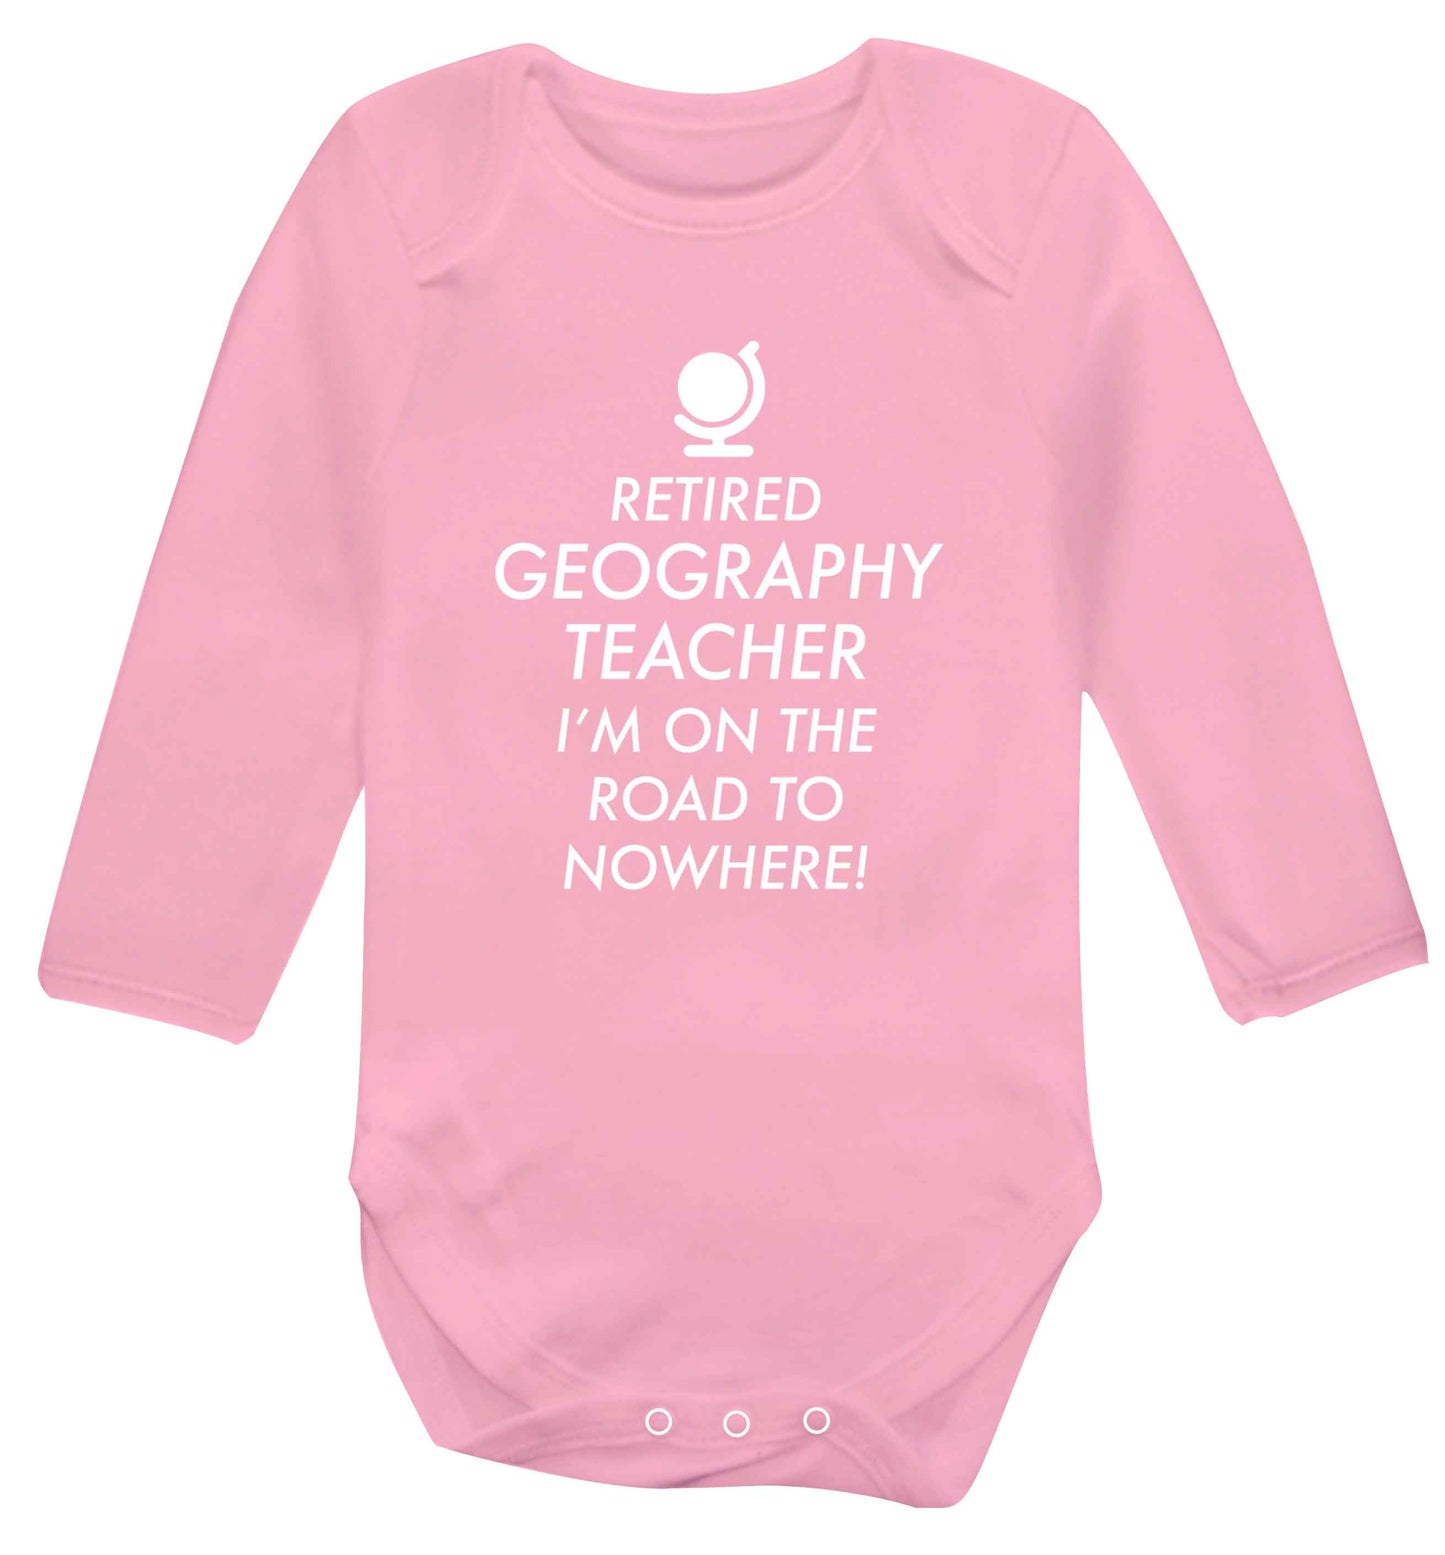 Retired geography teacher I'm on the road to nowhere Baby Vest long sleeved pale pink 6-12 months